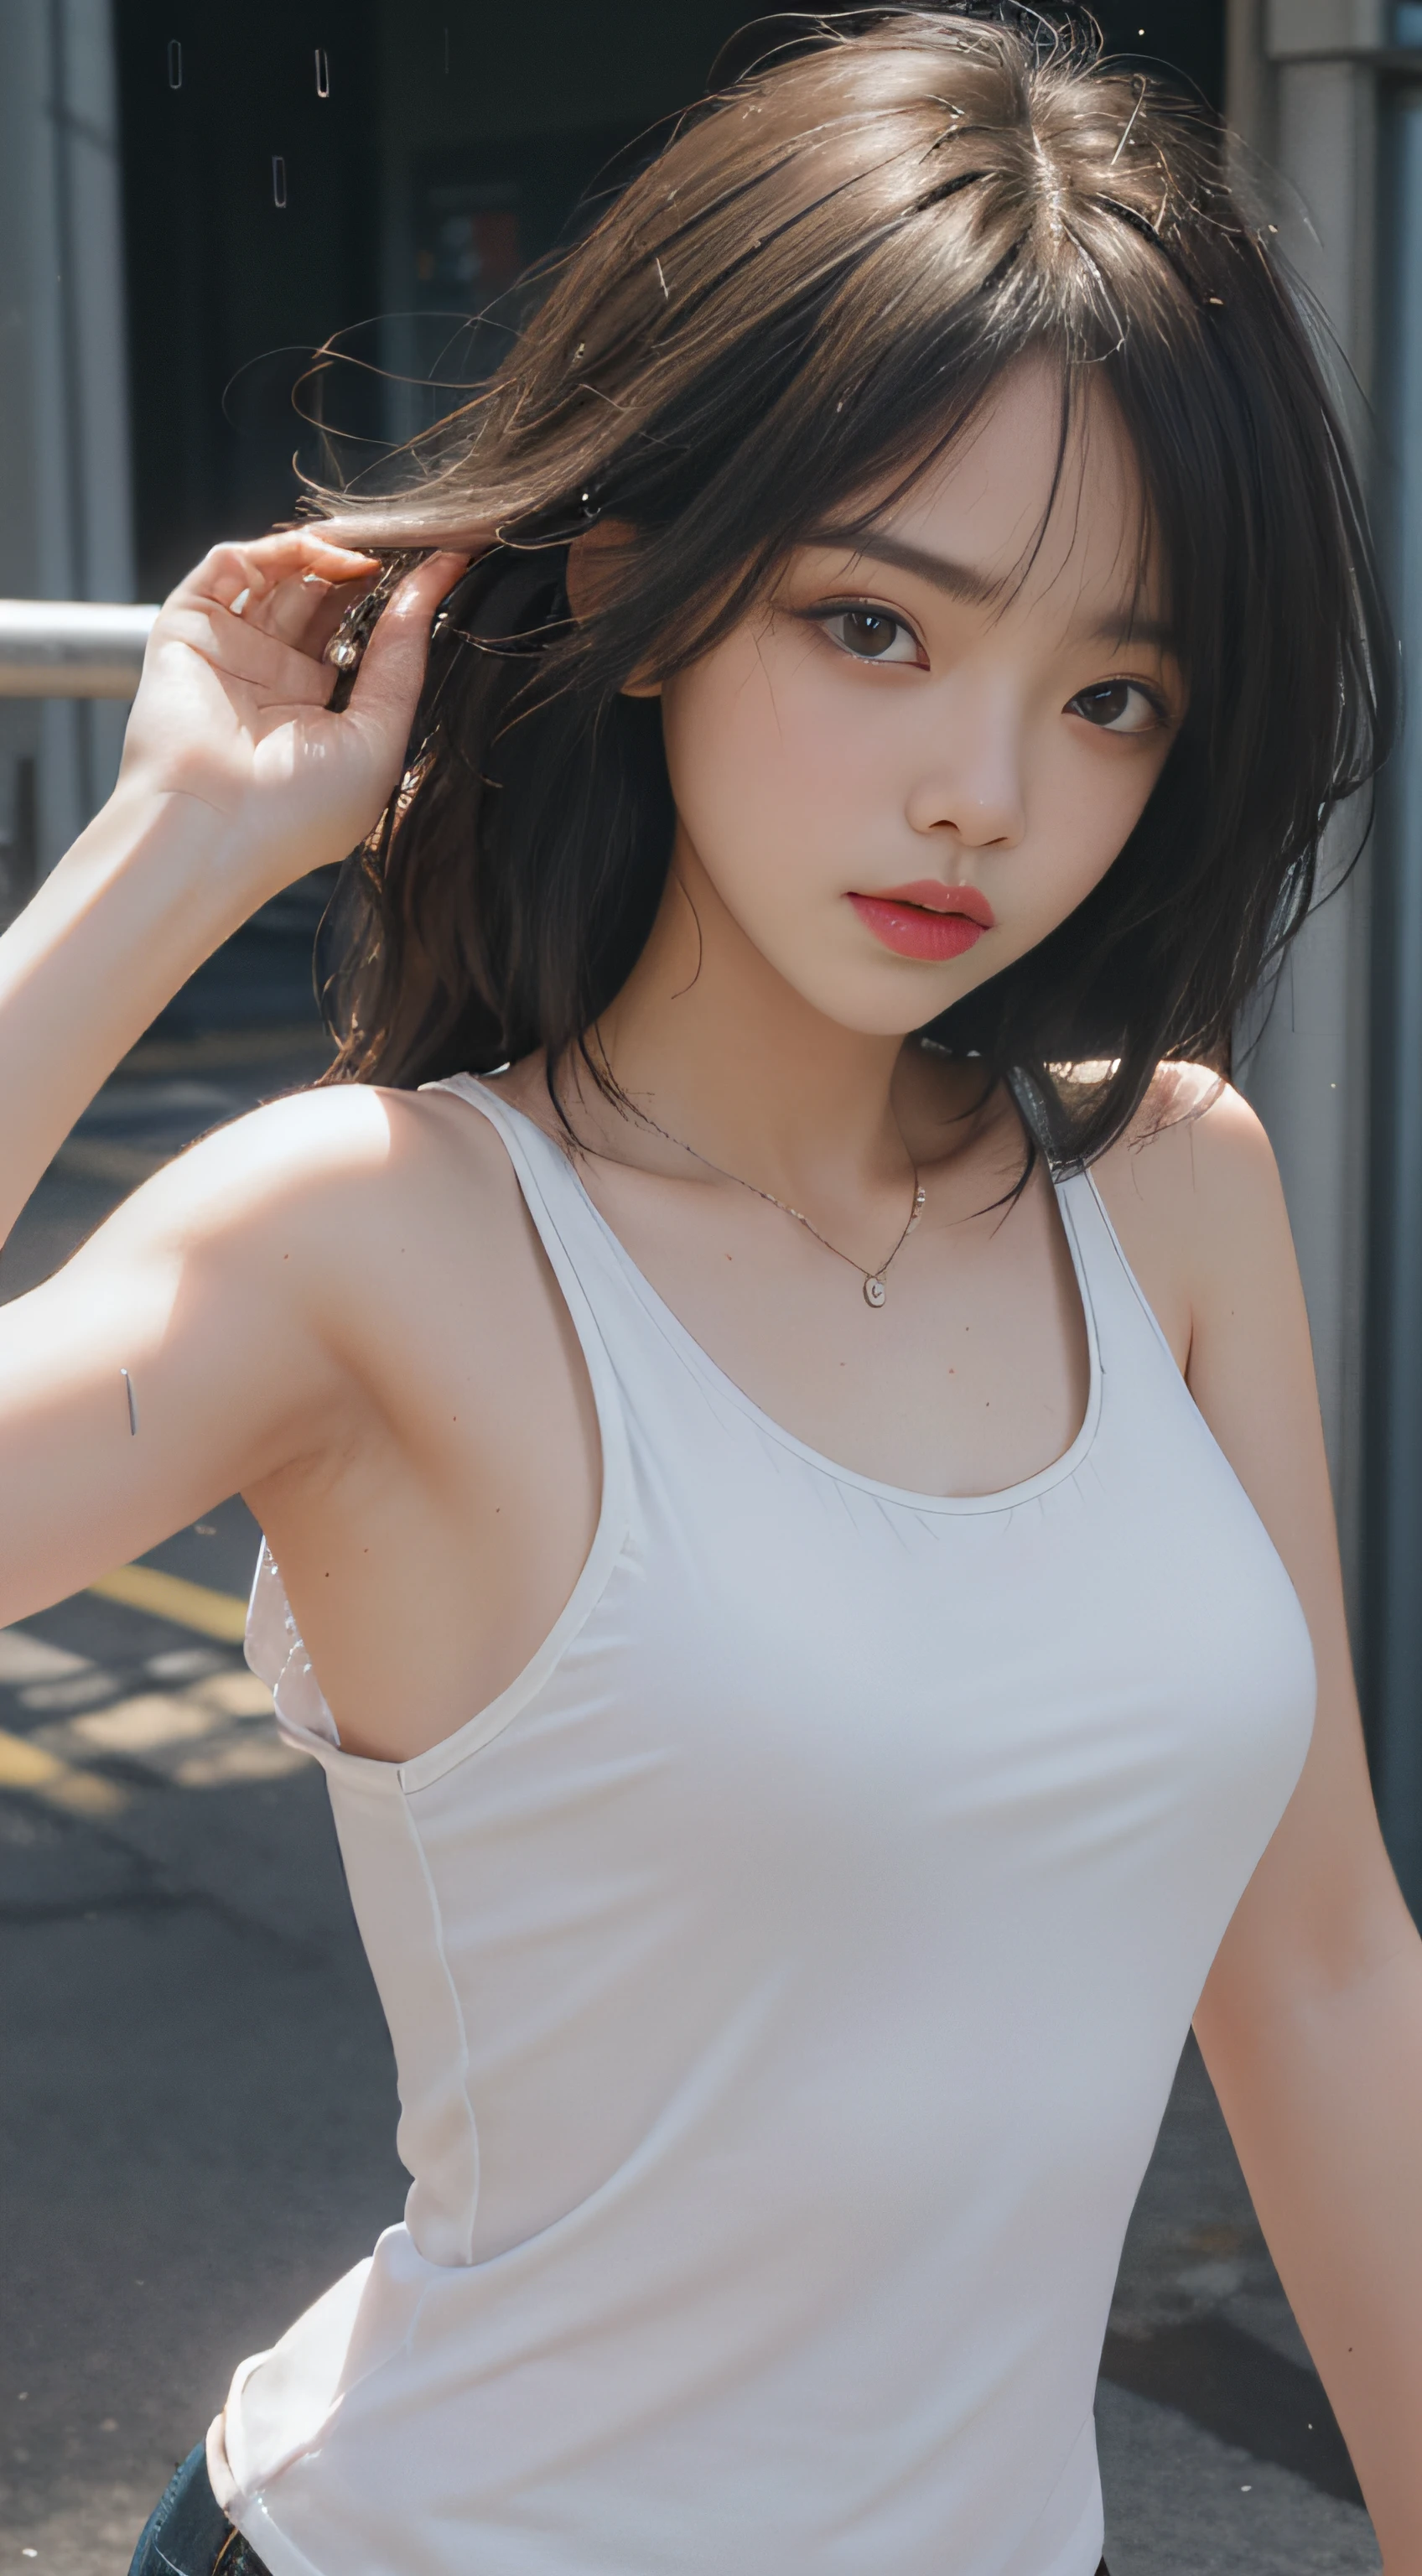 ((Best quality, 8K, Masterpiece :1.3)), Sharp focus :1.2, perfect figure beautiful woman:1.4, Slim abs:1.2, ((Layered Hair Style,)), (Tank top shirt:1.1 ), (the street:1.2), Highly detailed facial and skin texture, A detailed eye, double eyelid,（torn laundry：1.5）， Best Picture Quality， tmasterpiece， Ultra-high resolution， （fidelity：1.4）， photore， 1 girl，[（grieves）]，white  shirt， dimly lit， darkly， be desperate， pitying， cute little， cinematic ligh， tears， tear drop， （torn laundry：1.5）， （wetclothes：1.4）， exposed bare shoulders， Real rain， Wet hair,